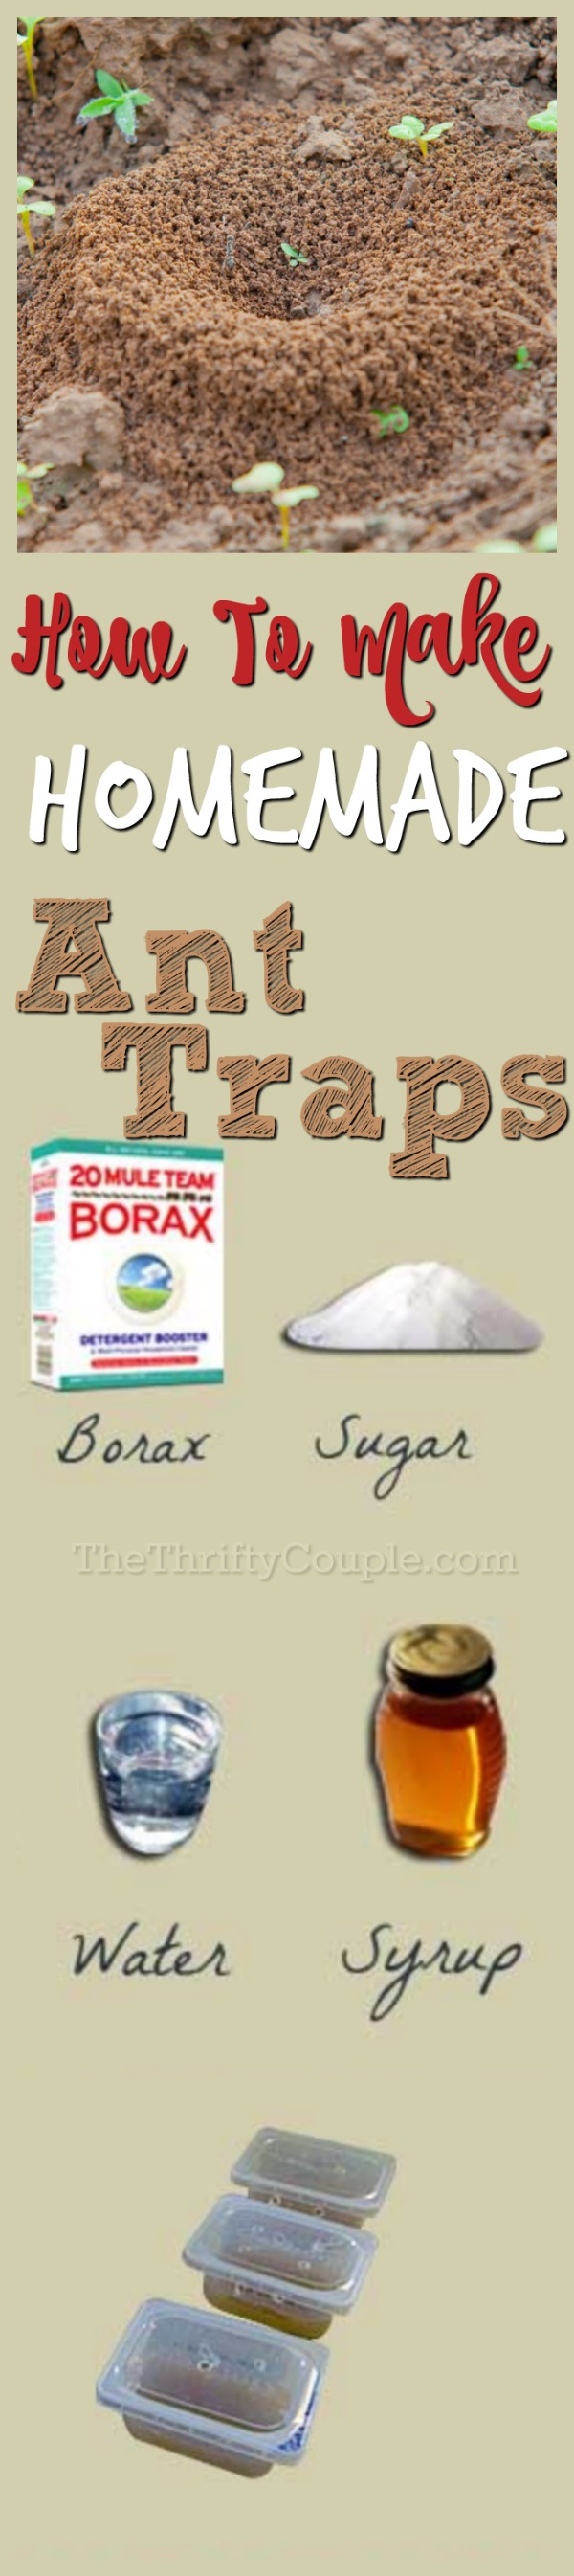 how-to-make-homemade-ant-traps